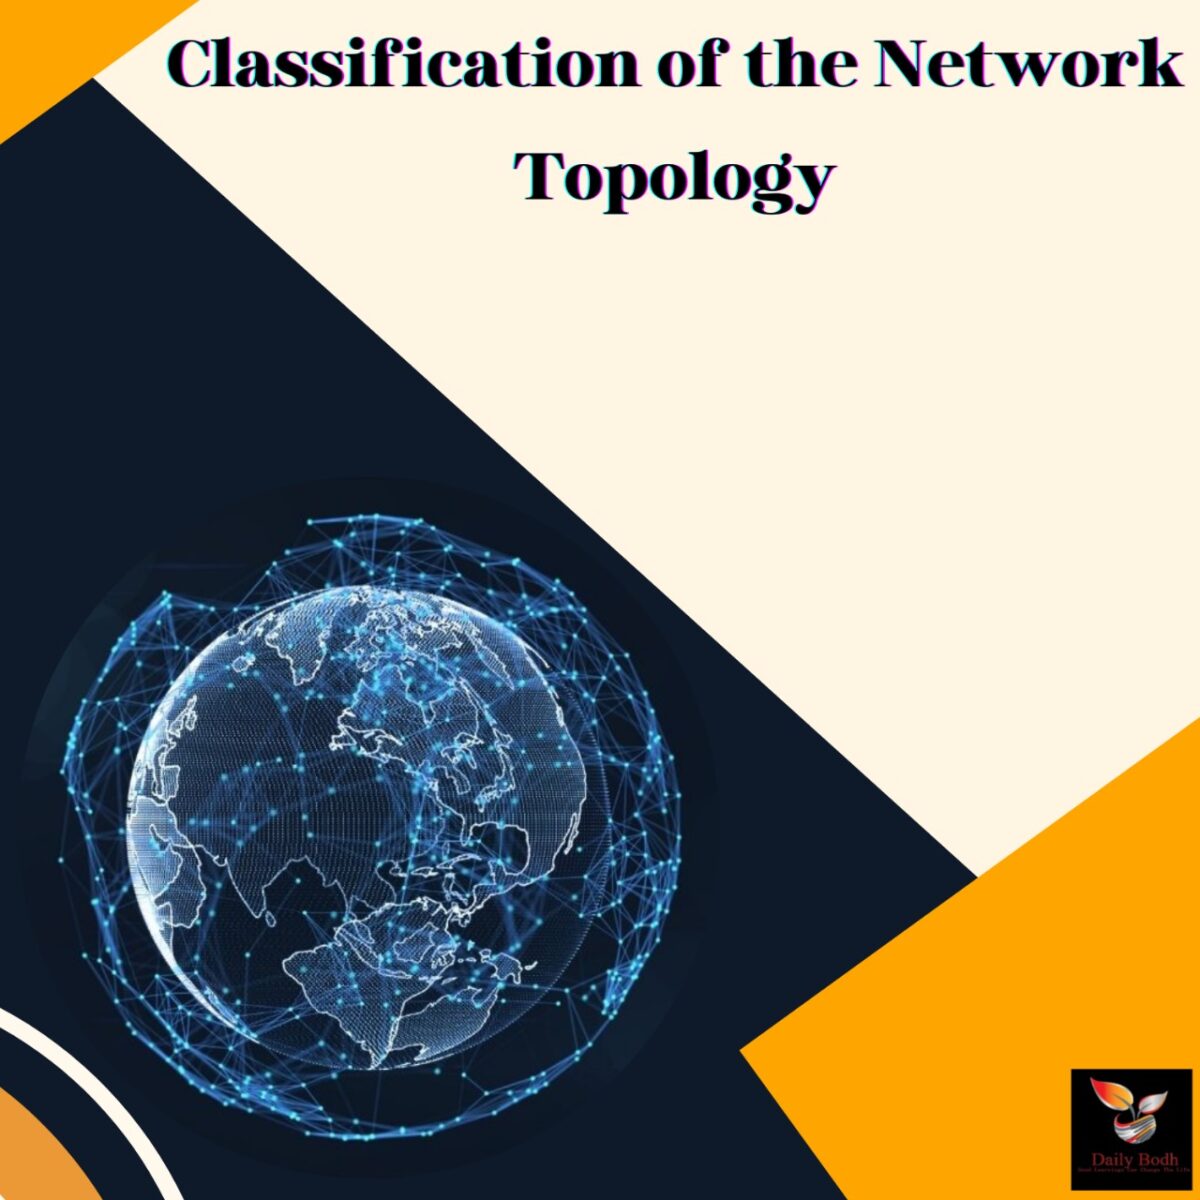 Network Topology 